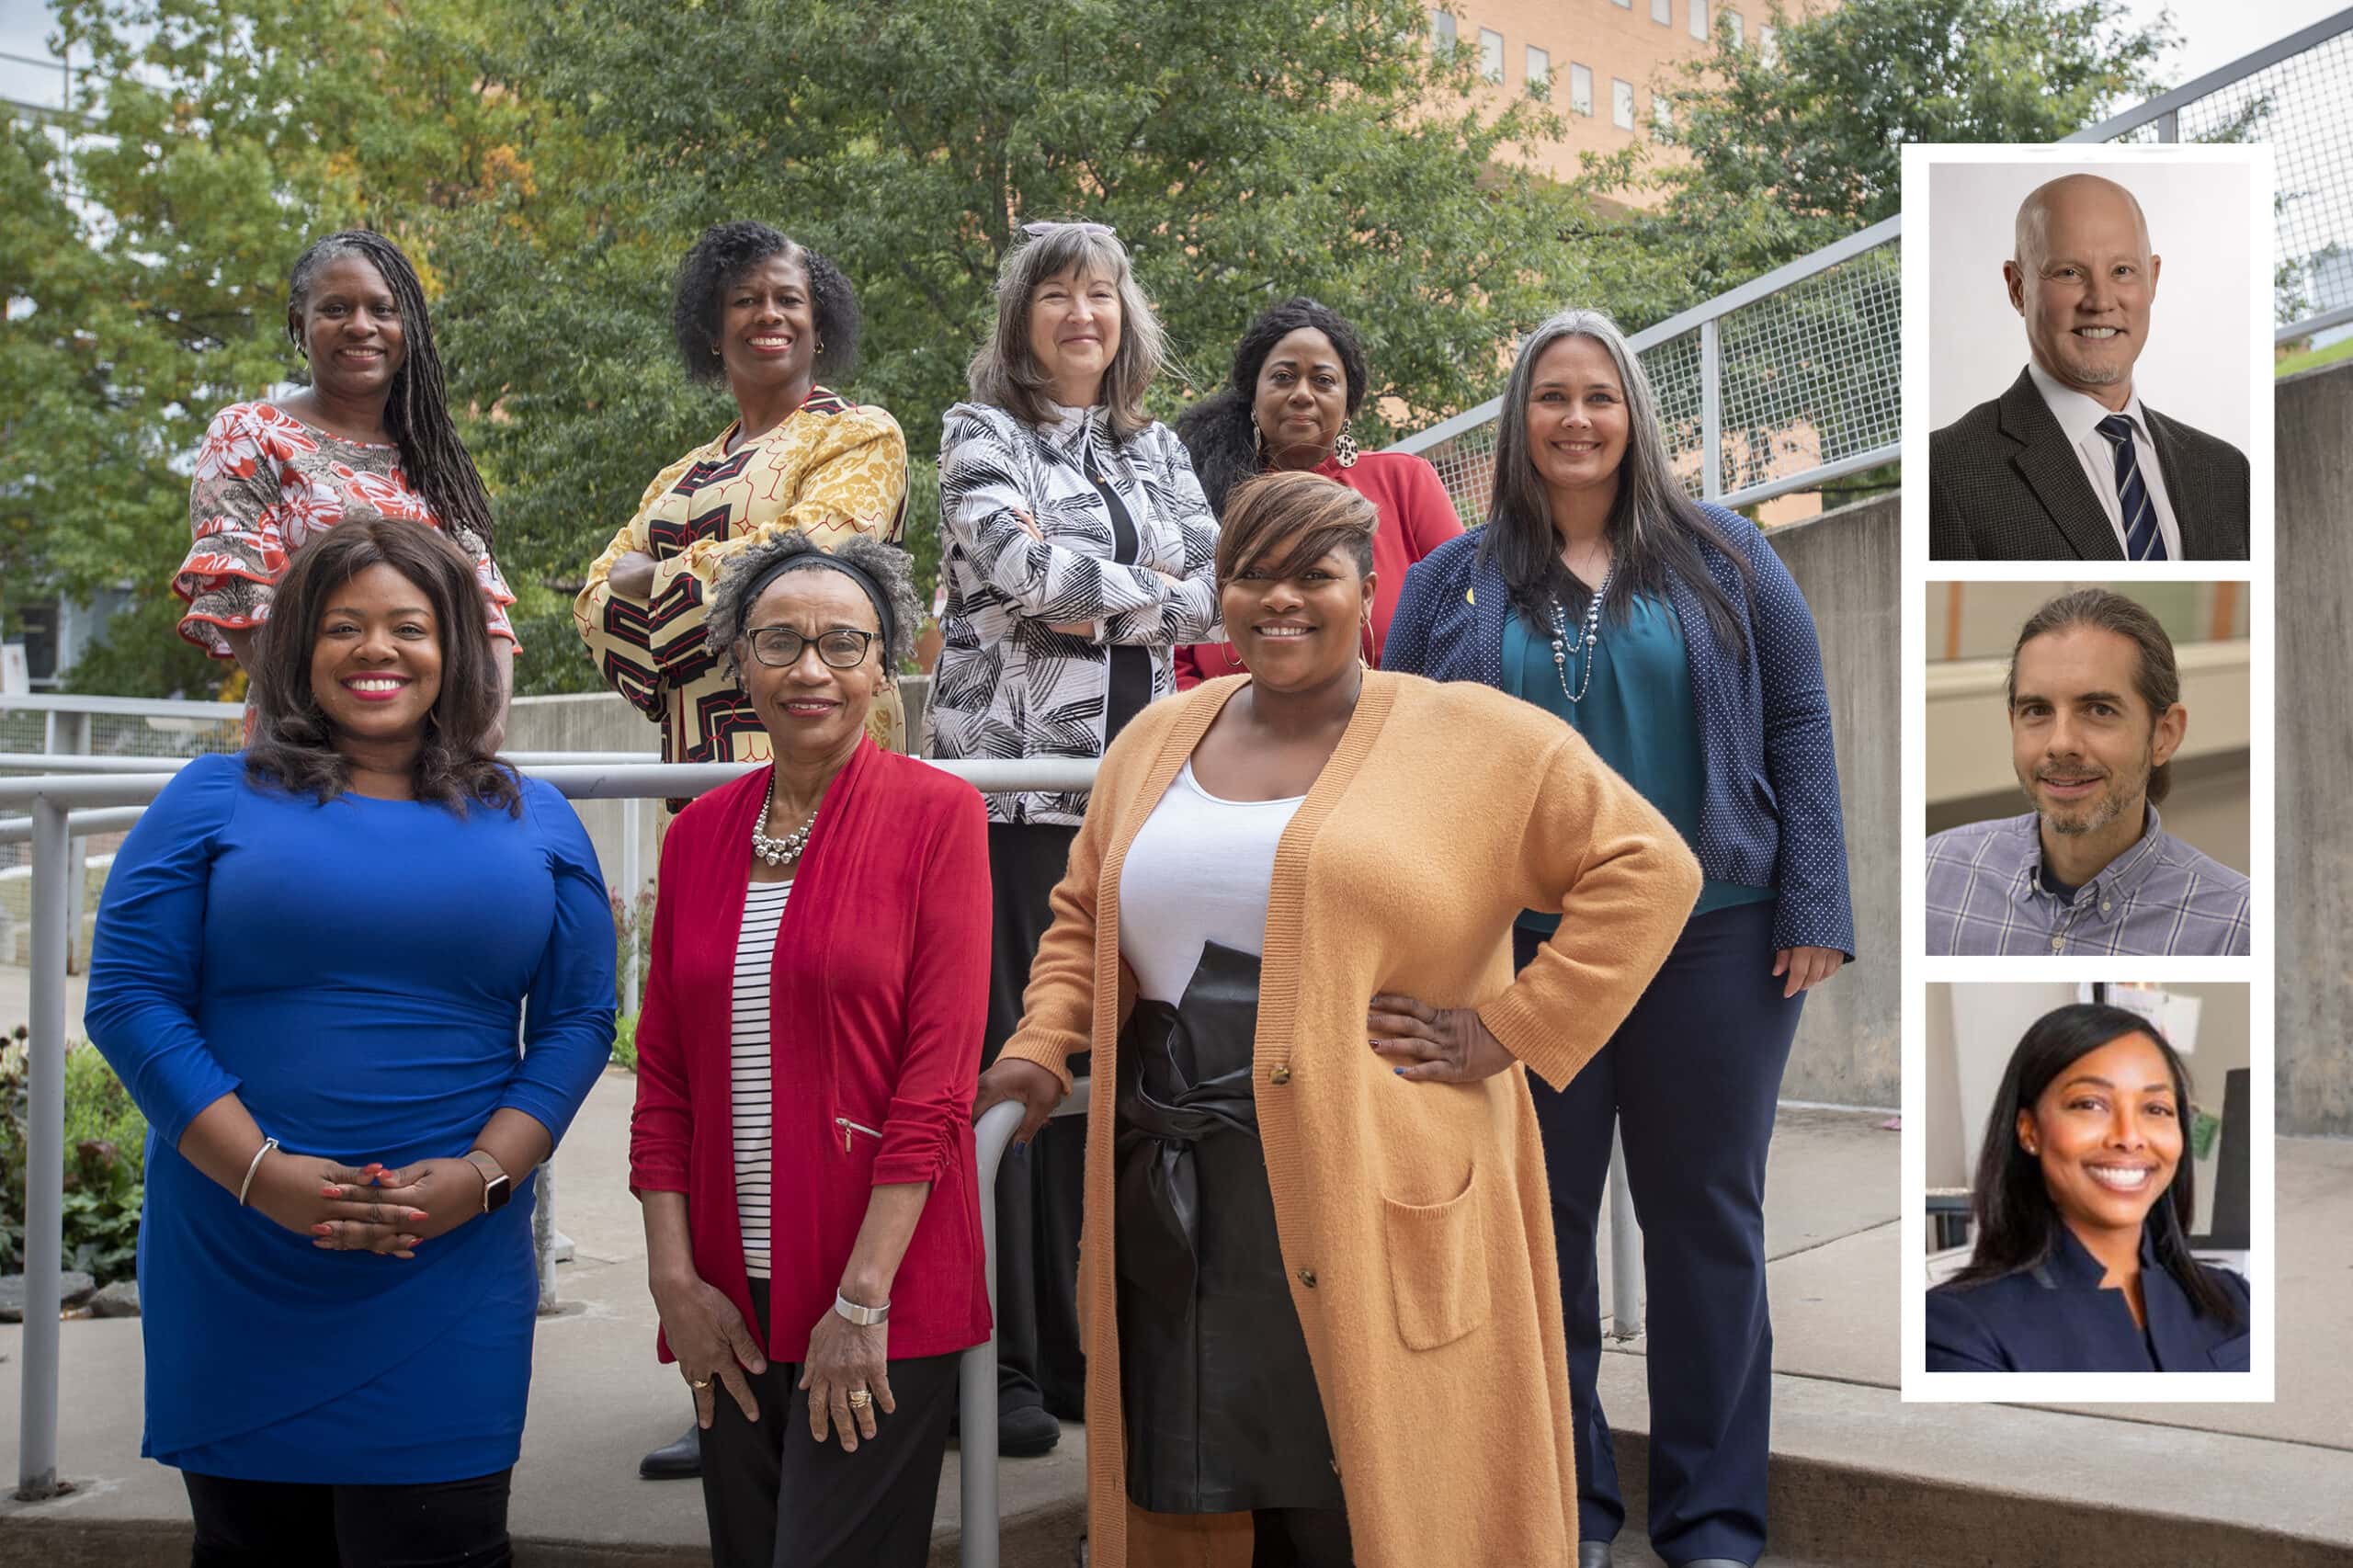 Members of the research team include, (back row, l-r) Keneshia Bryant-Moore, Ph.D., FNP-BC, RN, Pebbles Fagan, Ph.D., Carol Cornell, Ph.D., Linda Luster and Christina Hamilton; (front) Elizabeth Taylor, Theresa Prewitt, Dr.P.H., and Tiffany Haynes, Ph.D. Pictured separately are, from top: Mark Williams, Ph.D., Chris Long, Ph.D., and Mignonne Guy, Ph.D. (Virginia Commonwealth University).